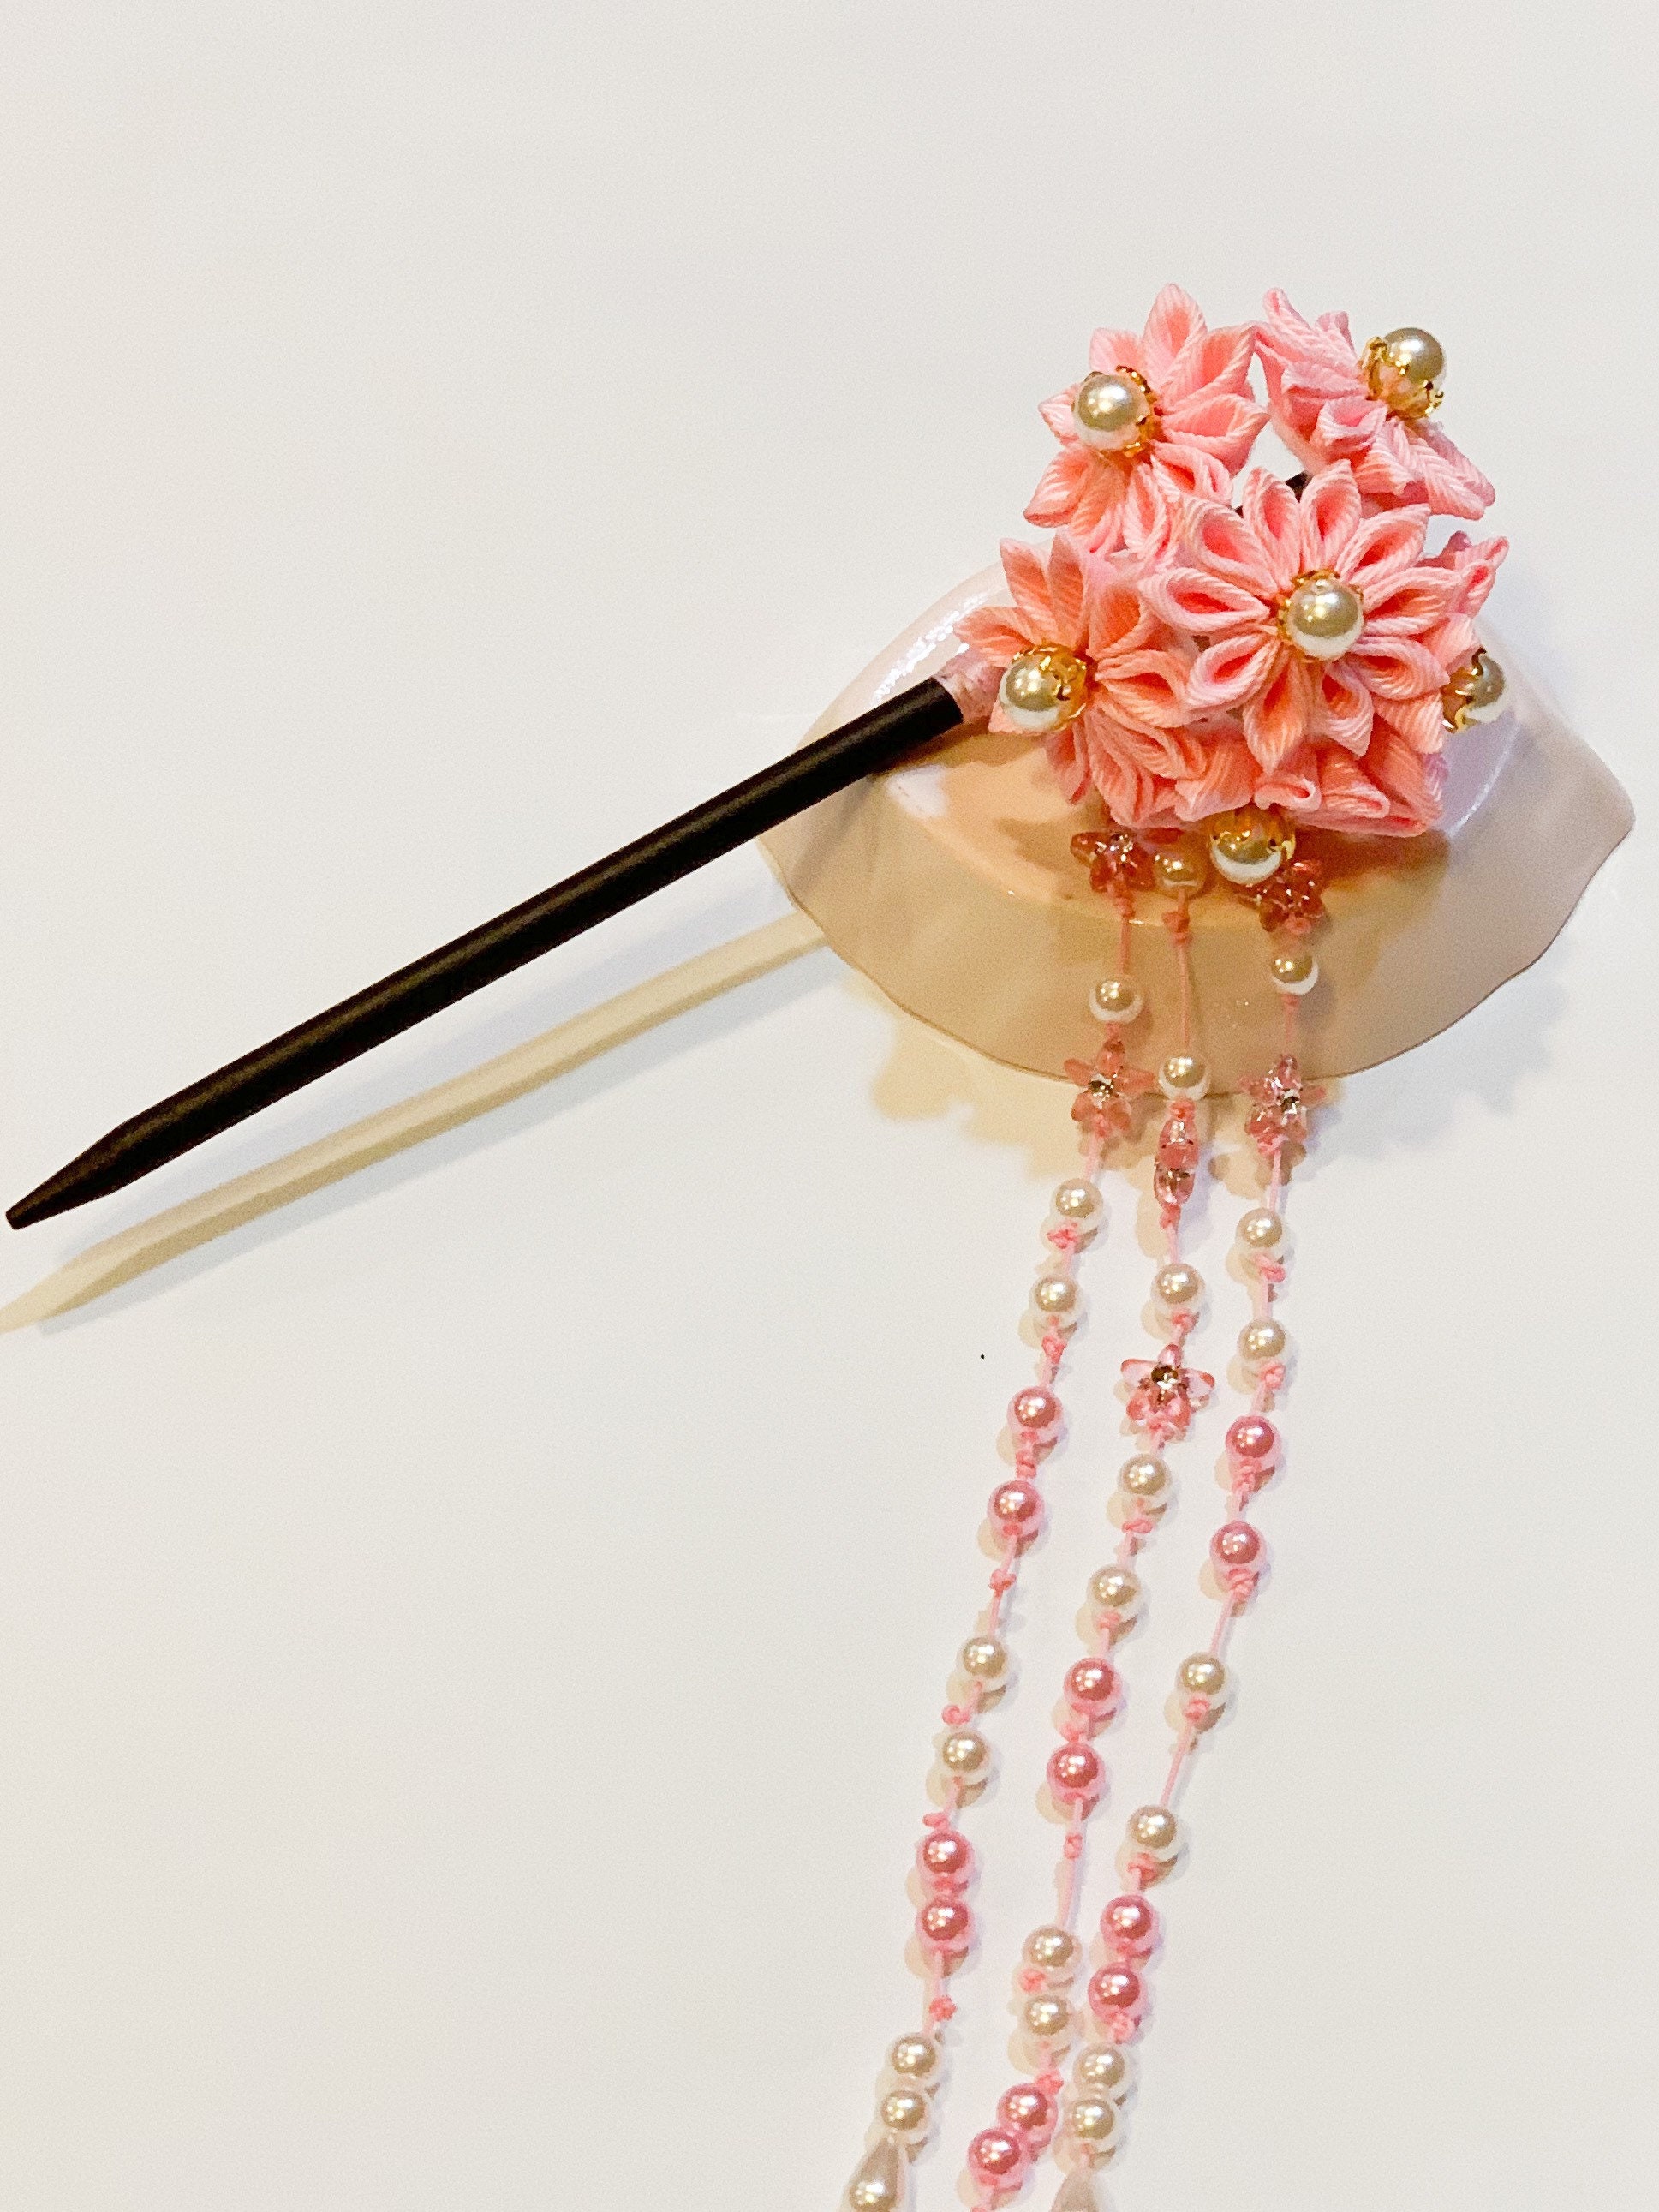 Kanzashi Hair Stick Pearls and leaves - j-okini - Products from Japan